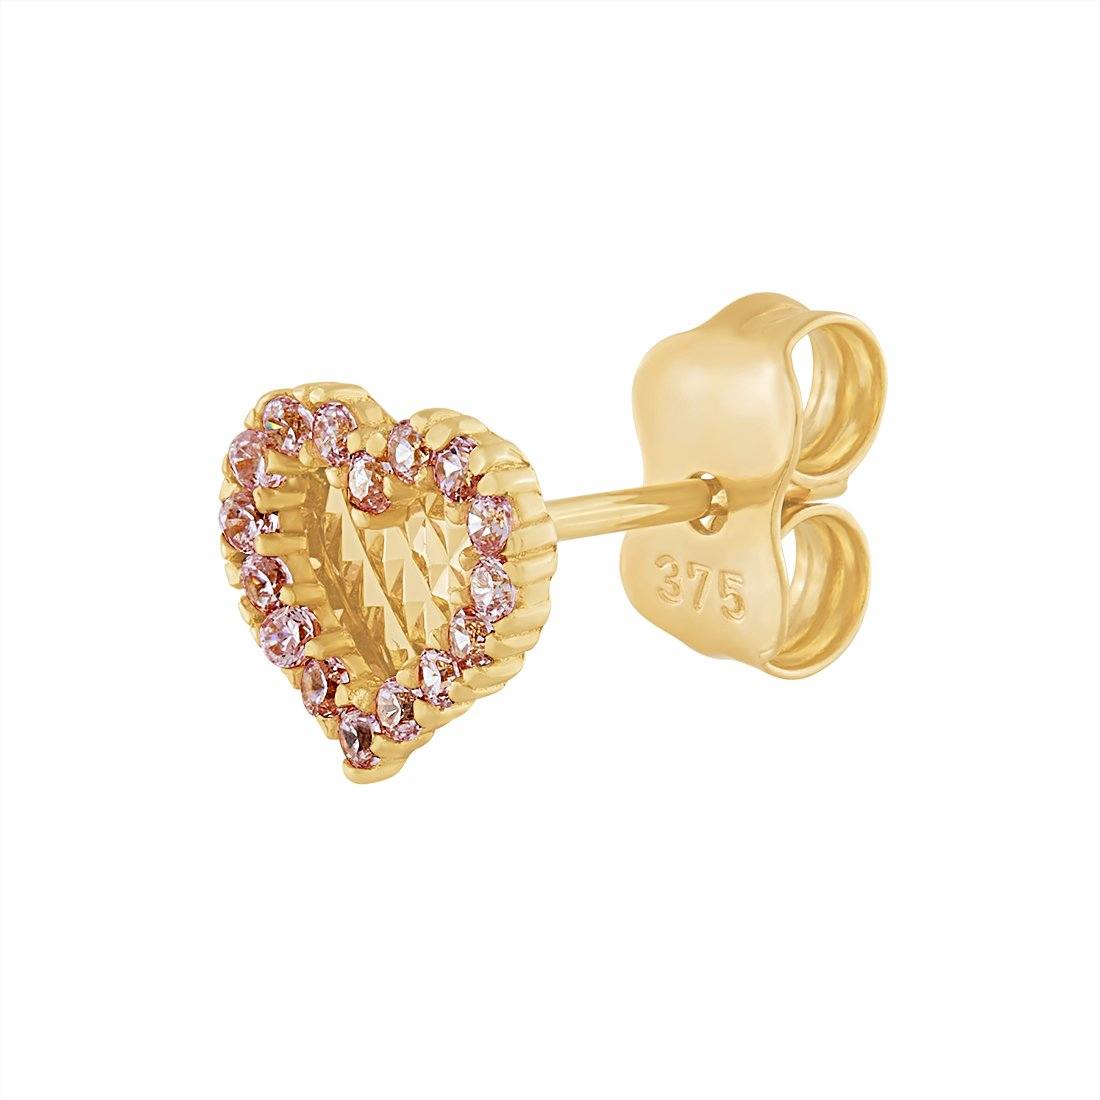 9ct Yellow Gold Heart Stud Earrings with Cubic Zirconia Earrings Bevilles 